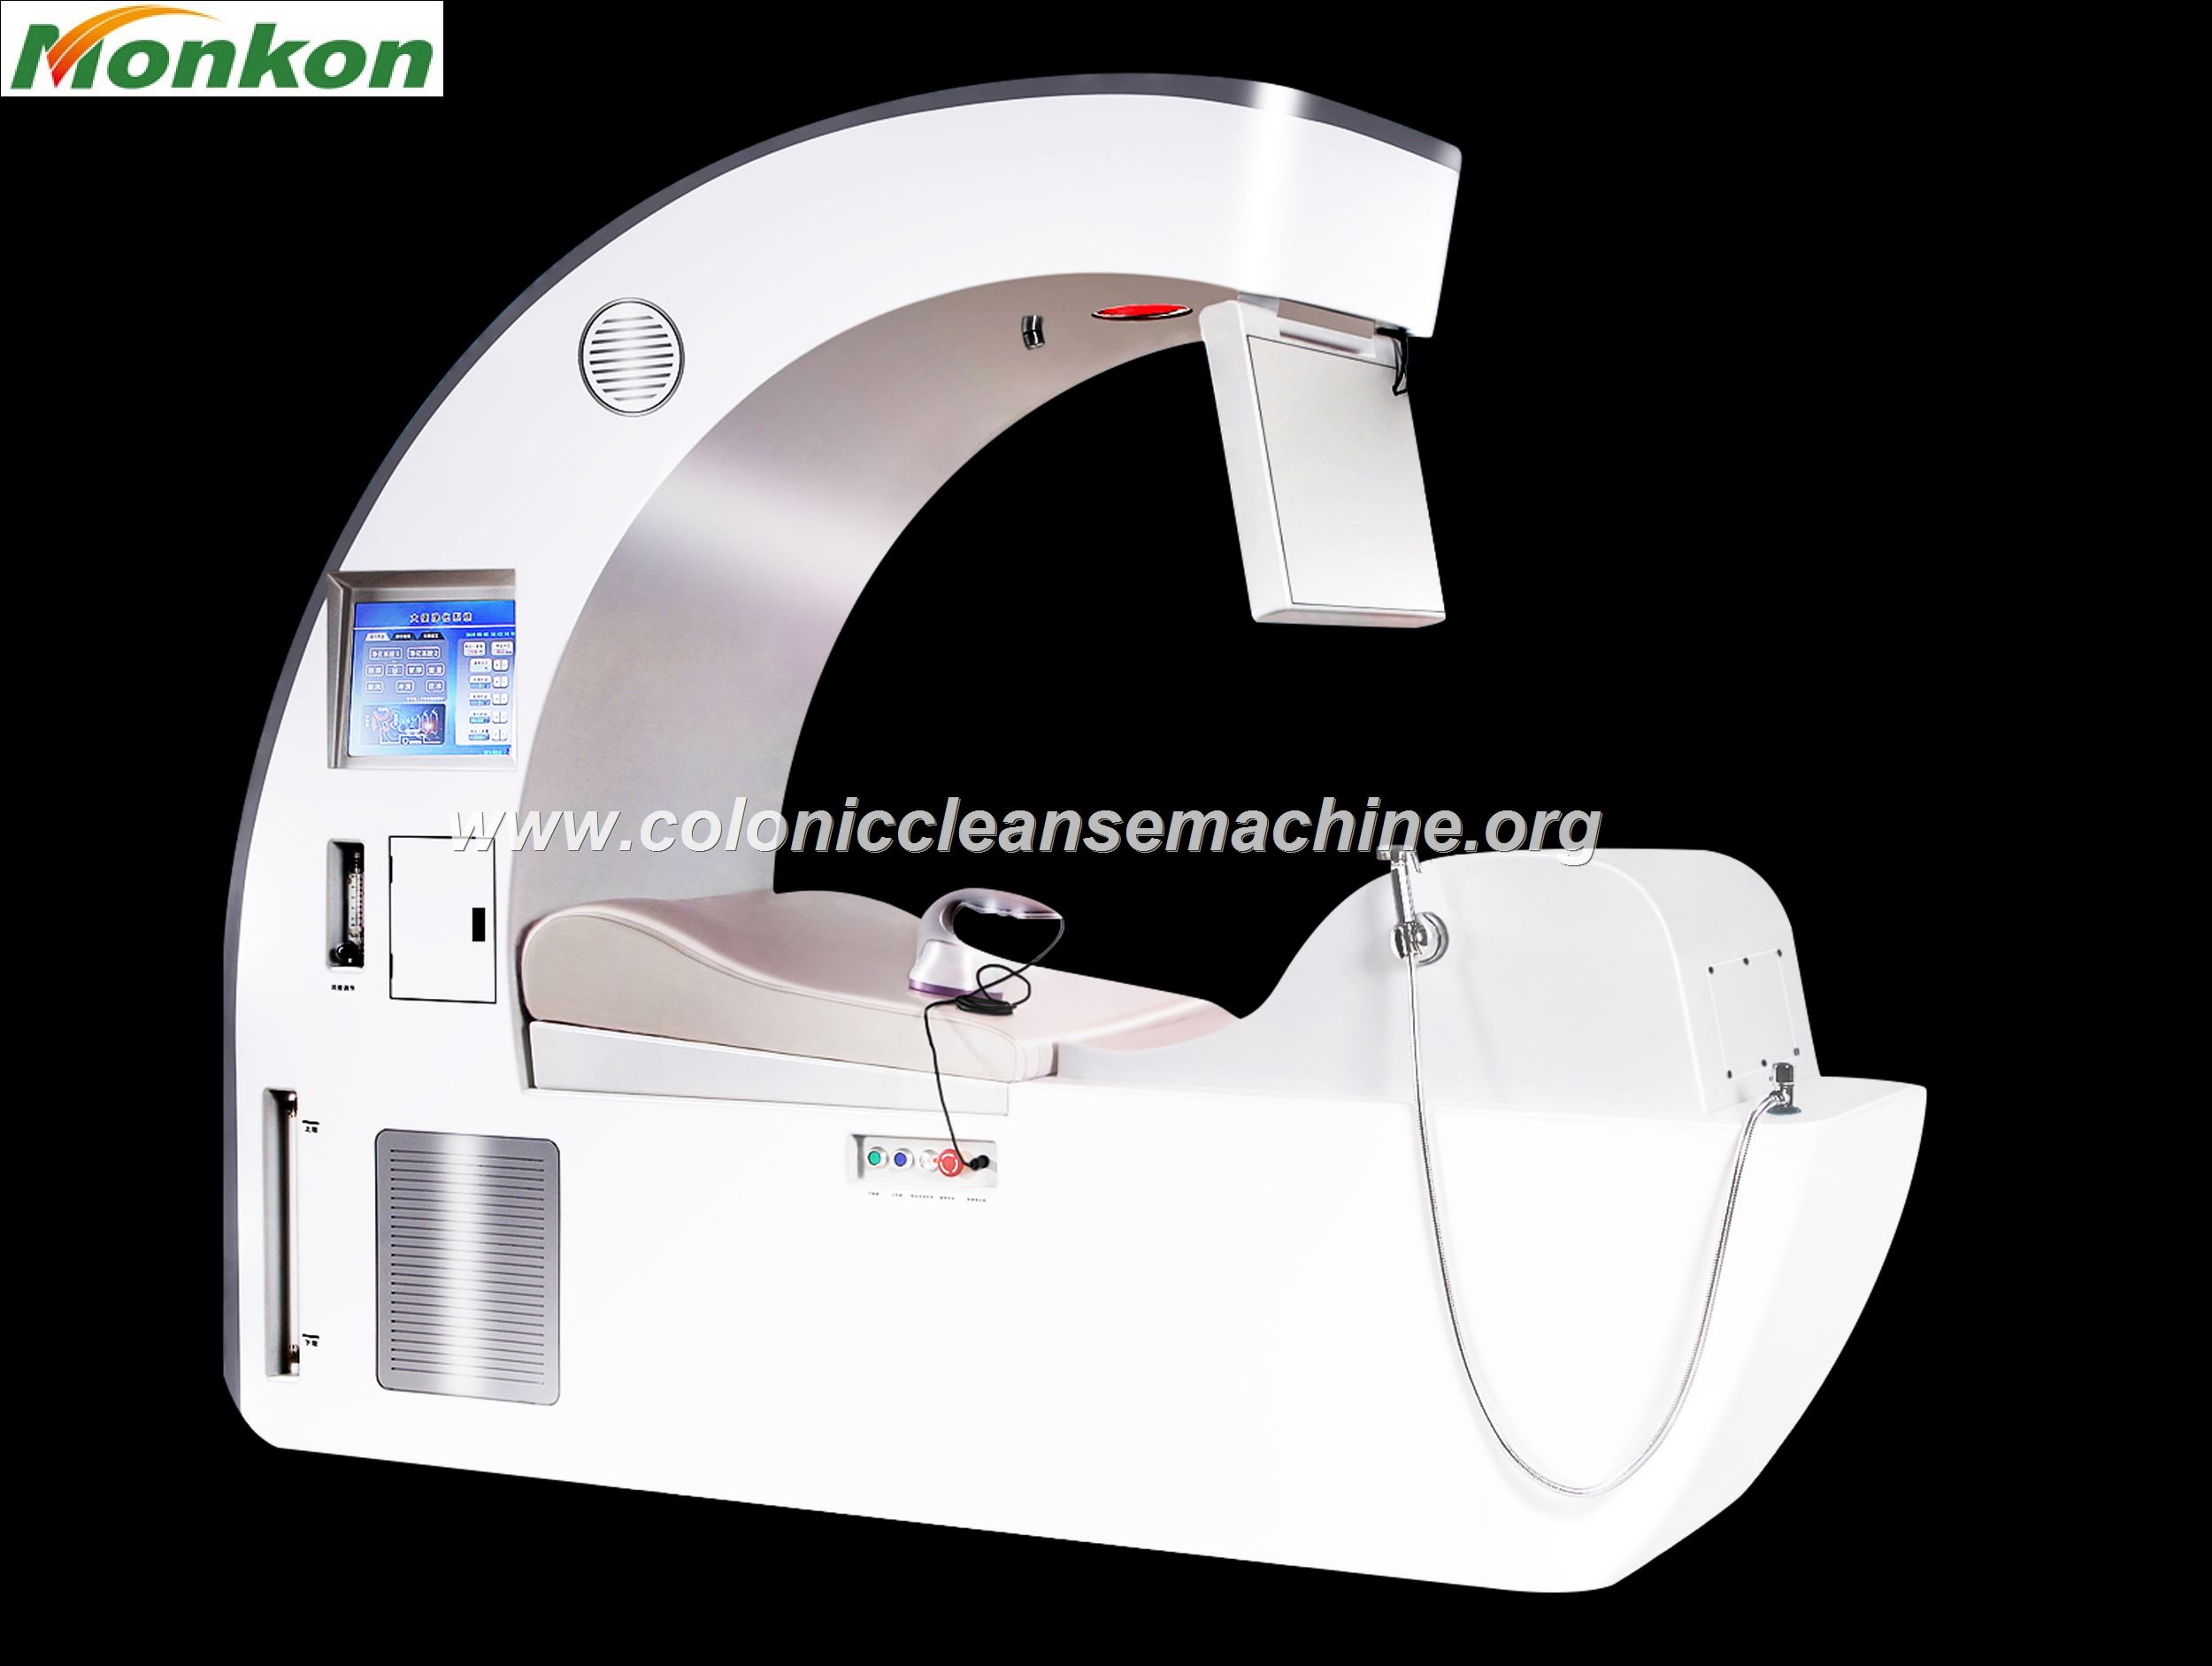 Latest MAIKONG New Colonic Machine for Sale